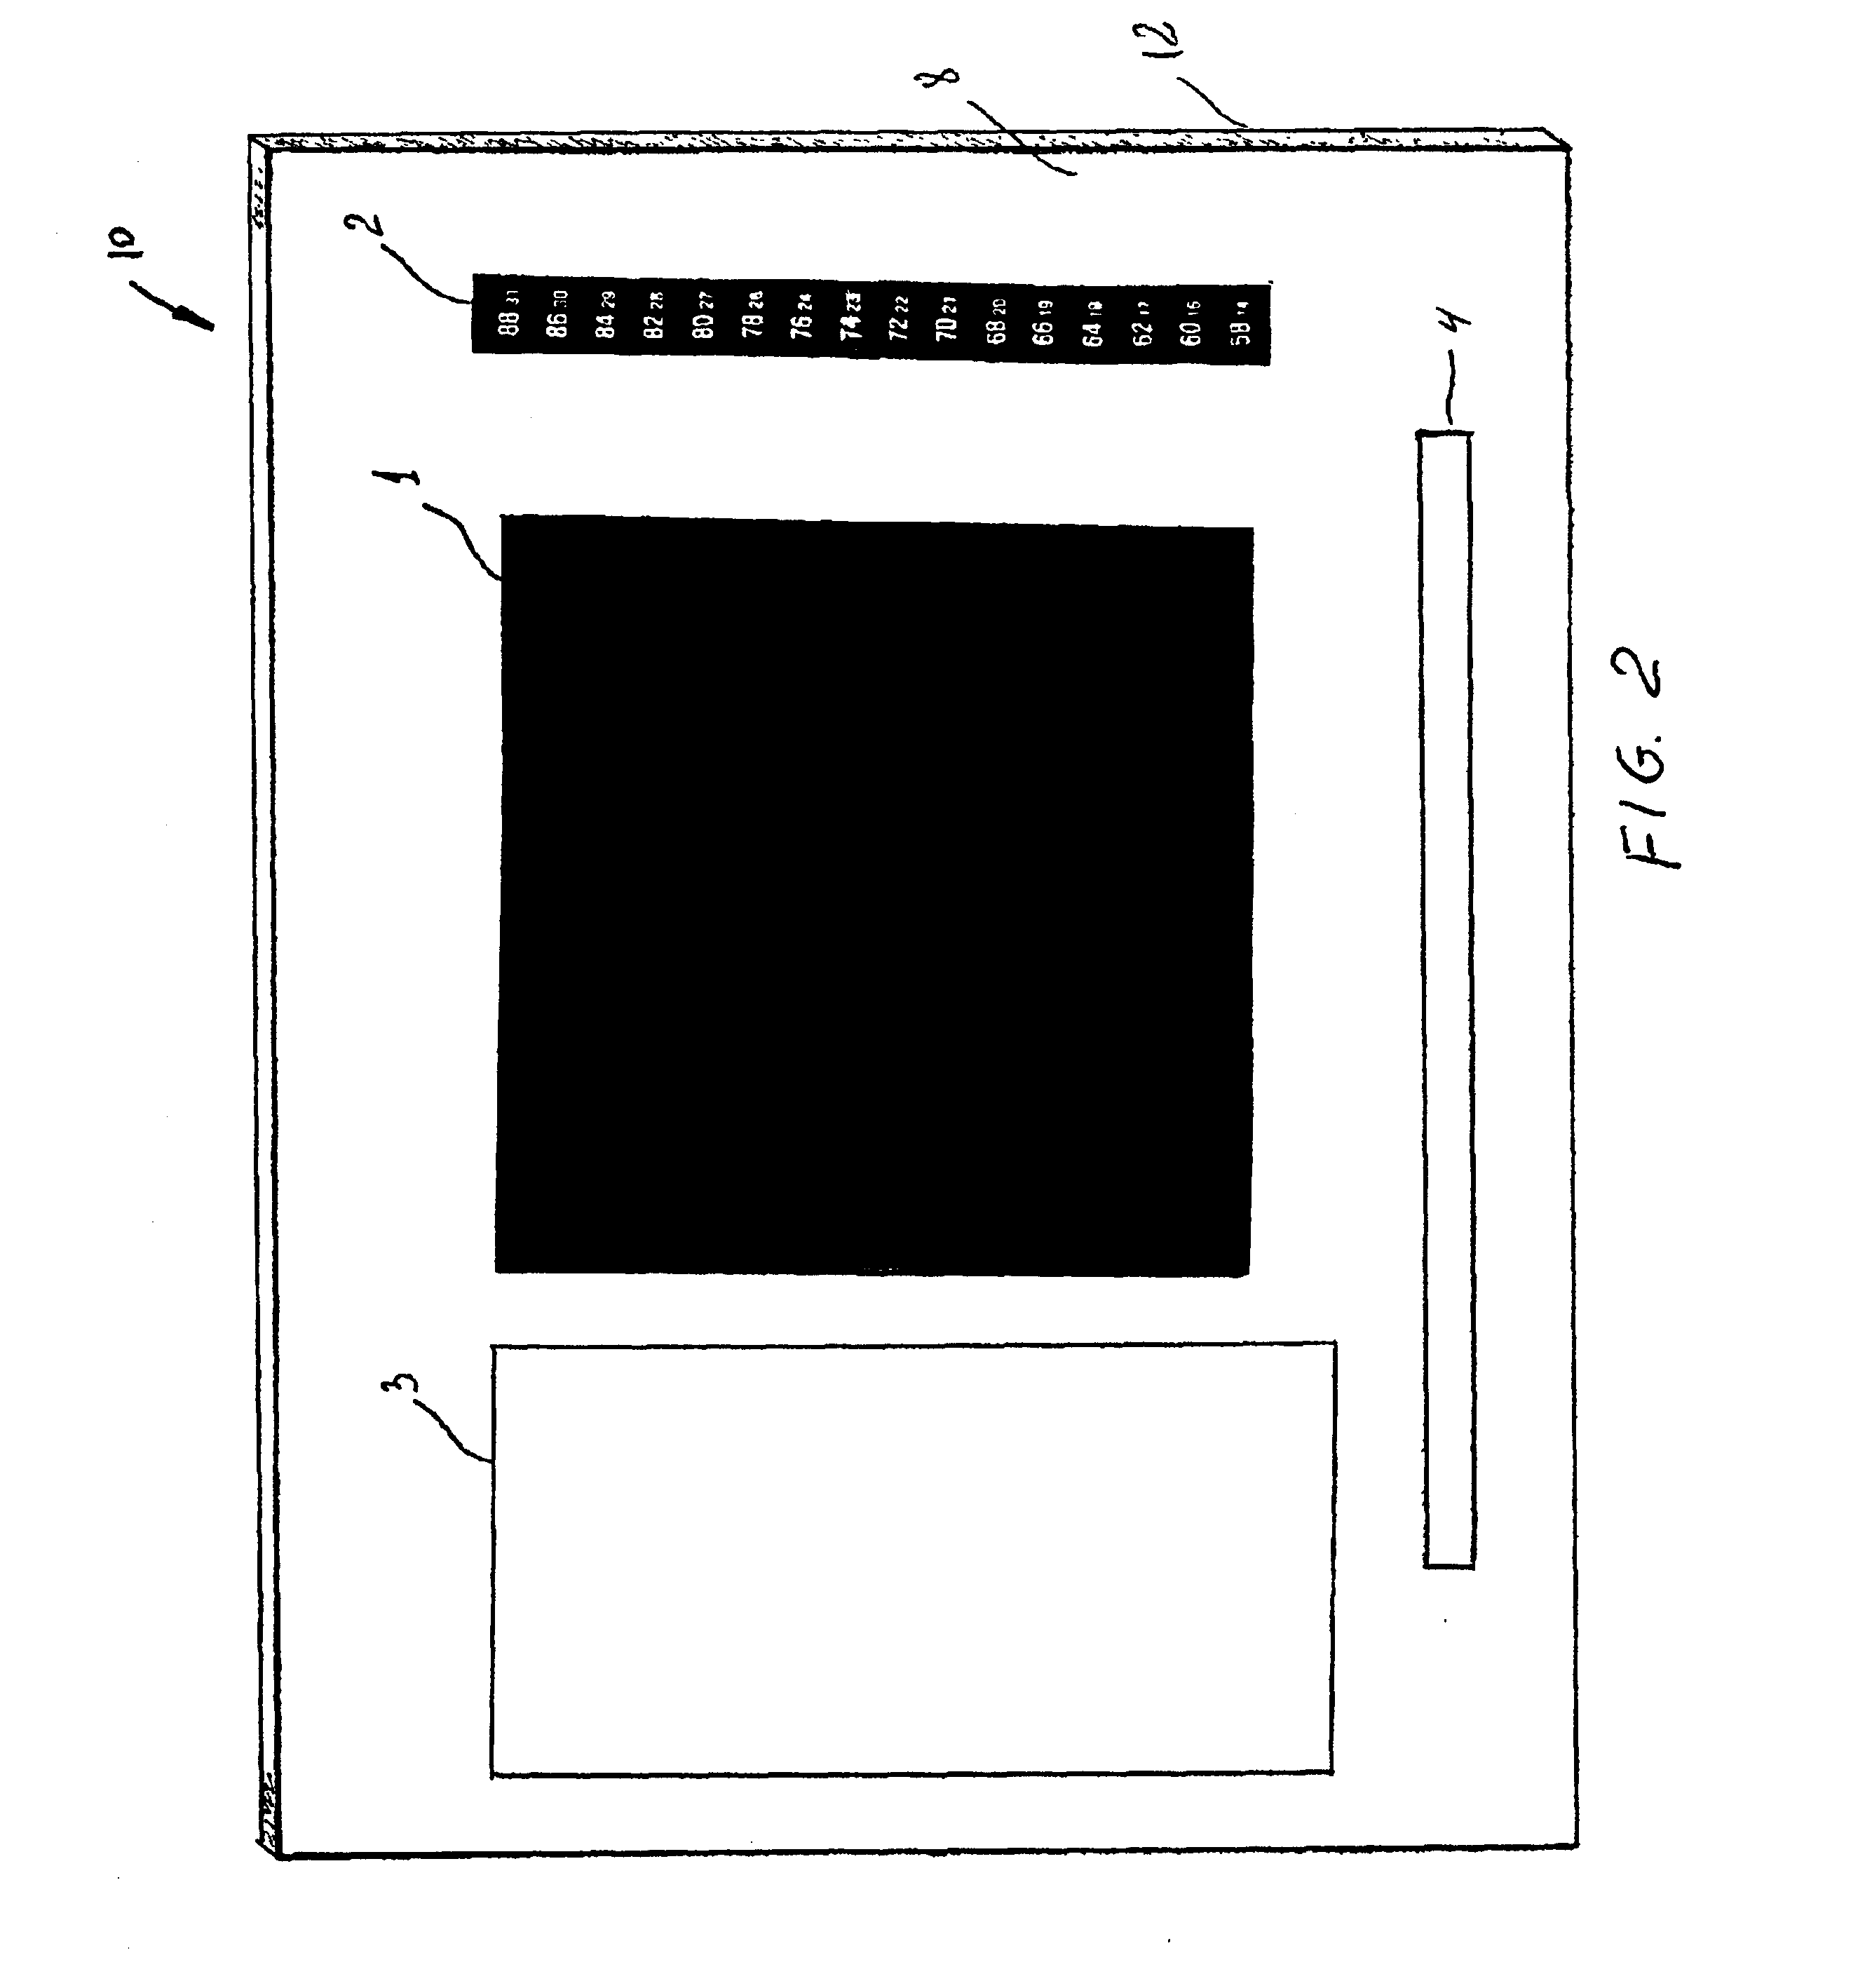 Method and apparatus for verifying accuracy of an infrared thermometer